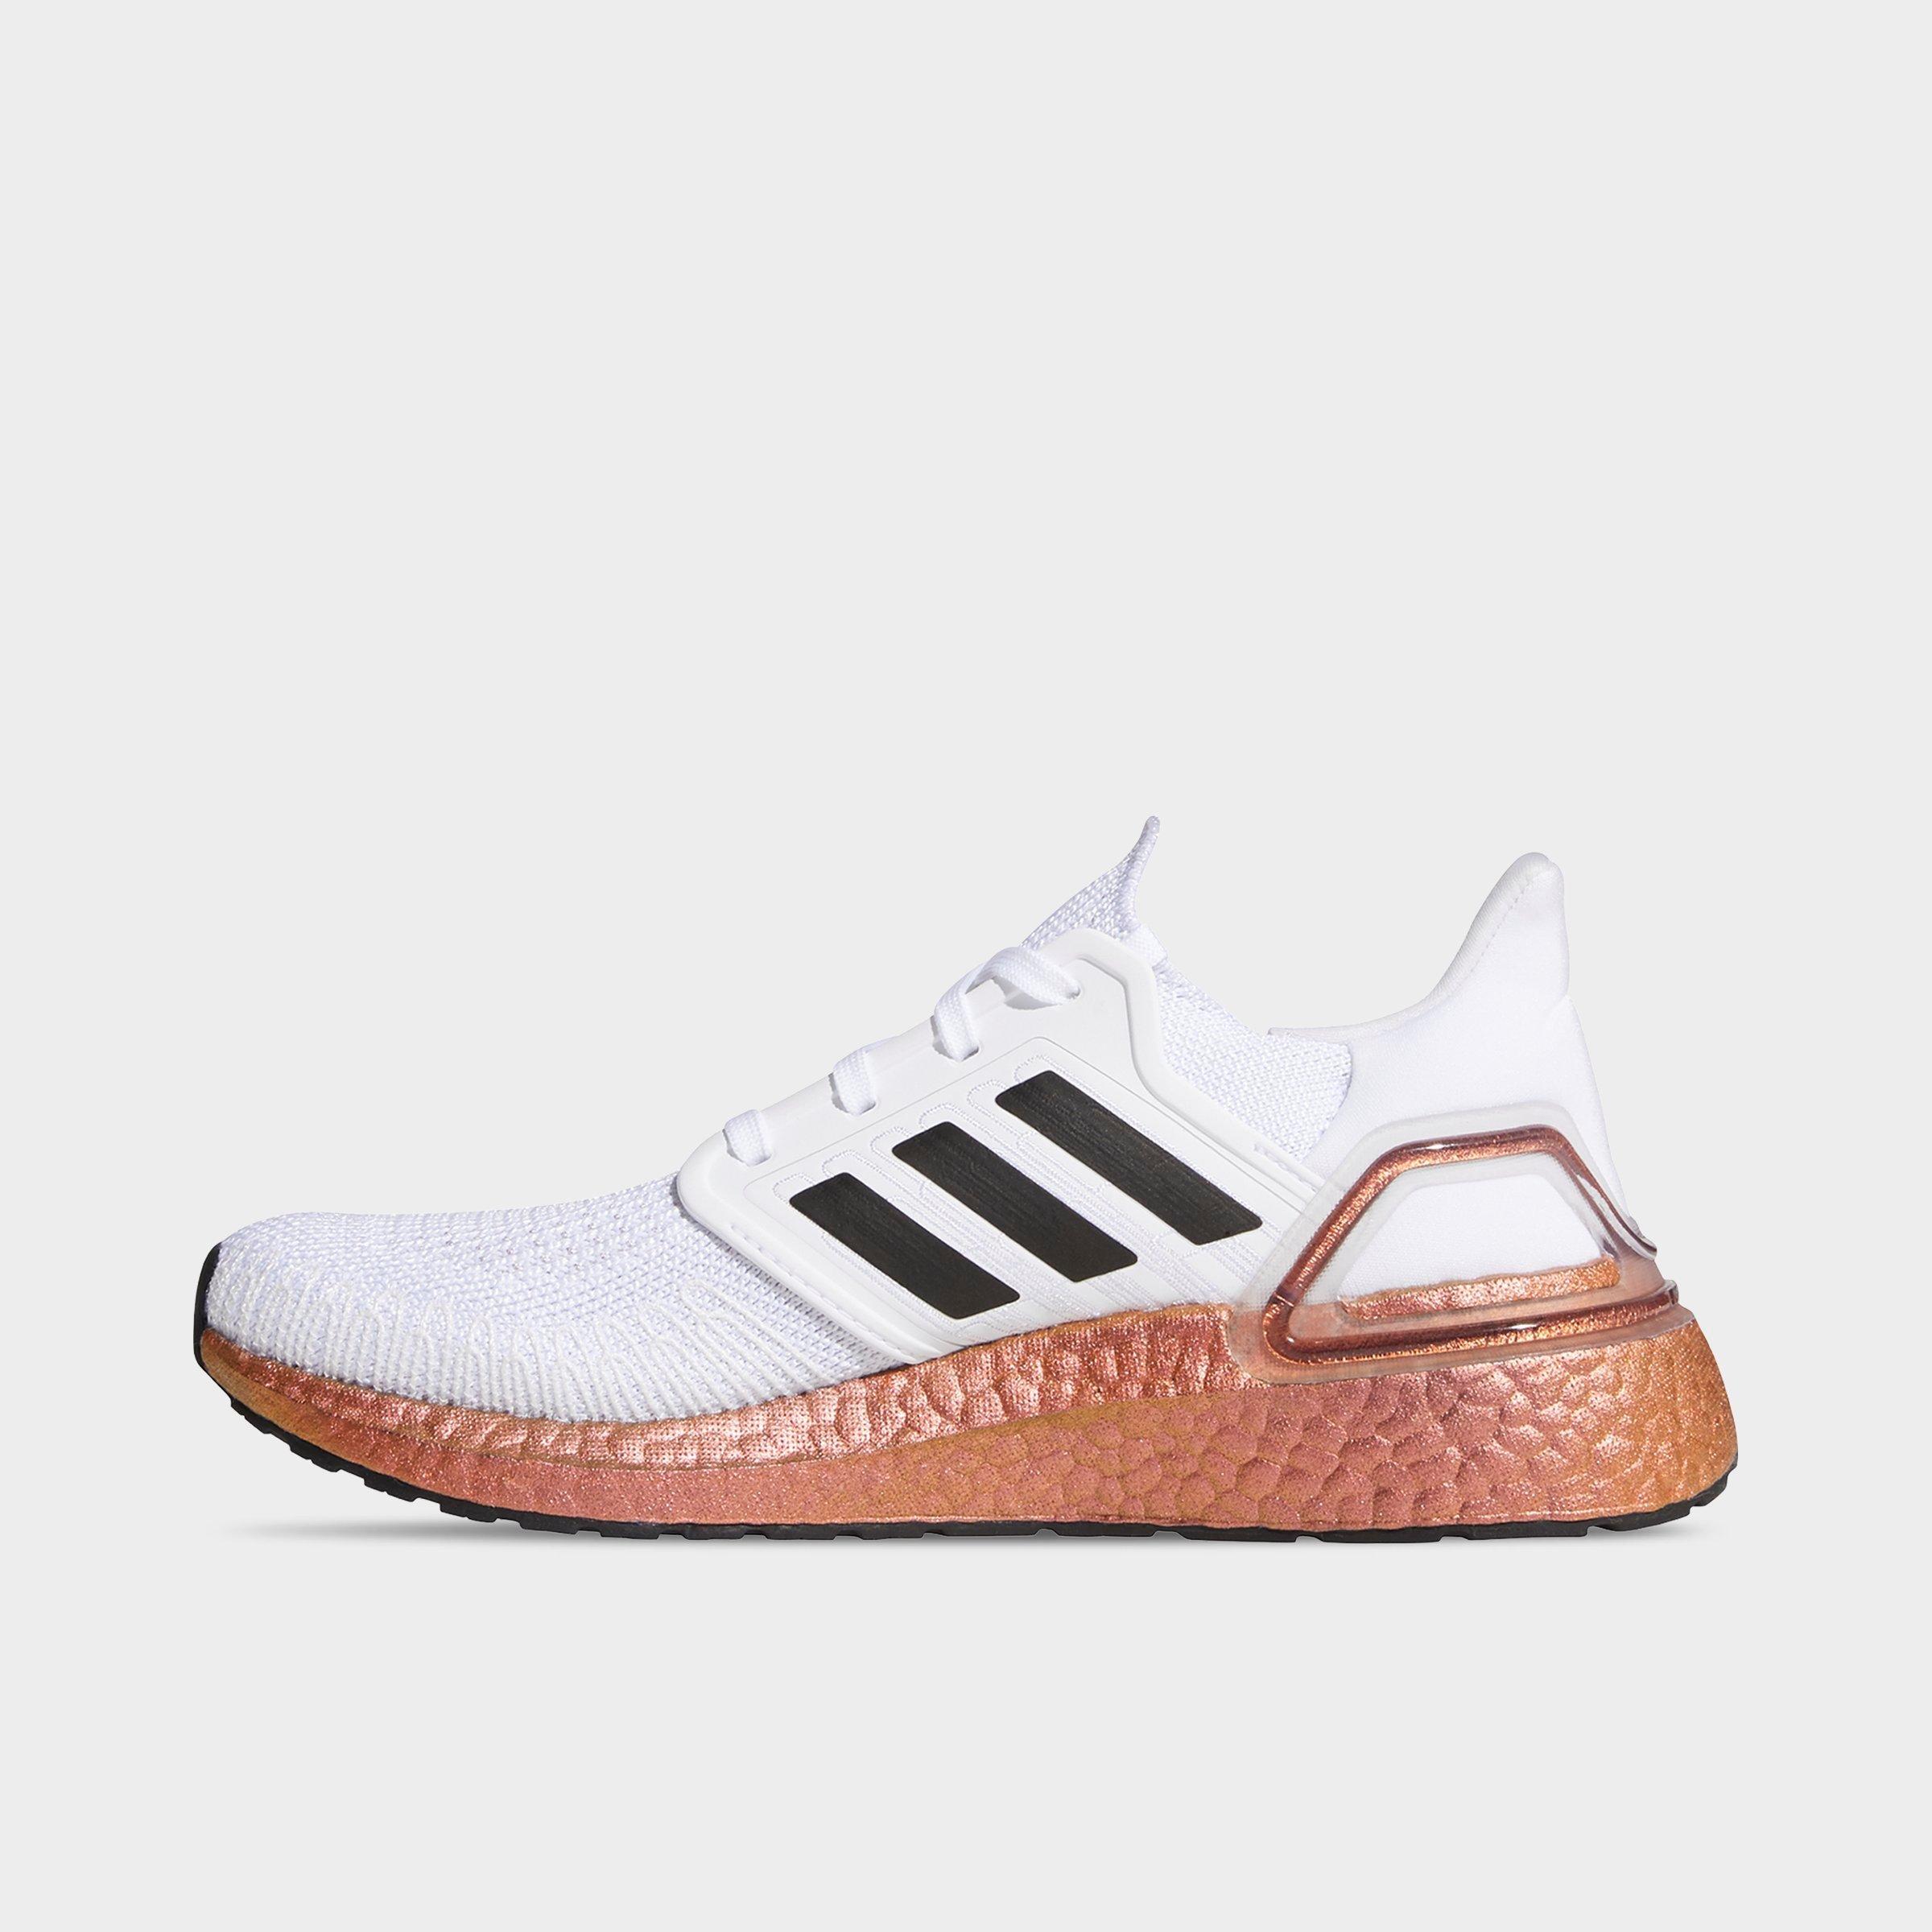 adidas BOOST Shoes | NMD, EQT, Stan Smith, Yeezy, Iniki Runner | Finish Line